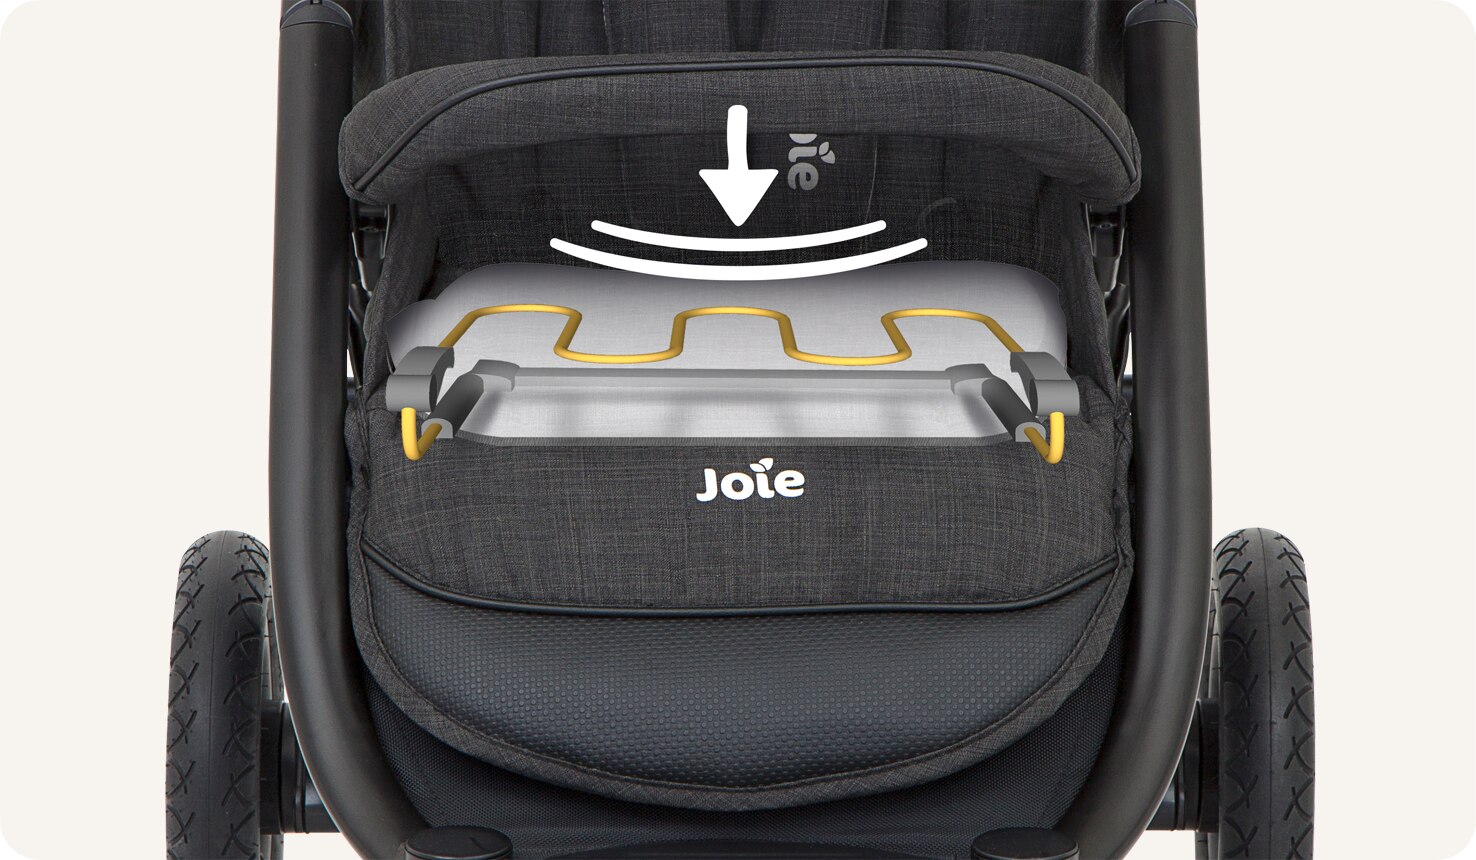 Closeup on the seat of the Mytrax Flex stroller with a cutaway showing the suspension spring inside the seat.